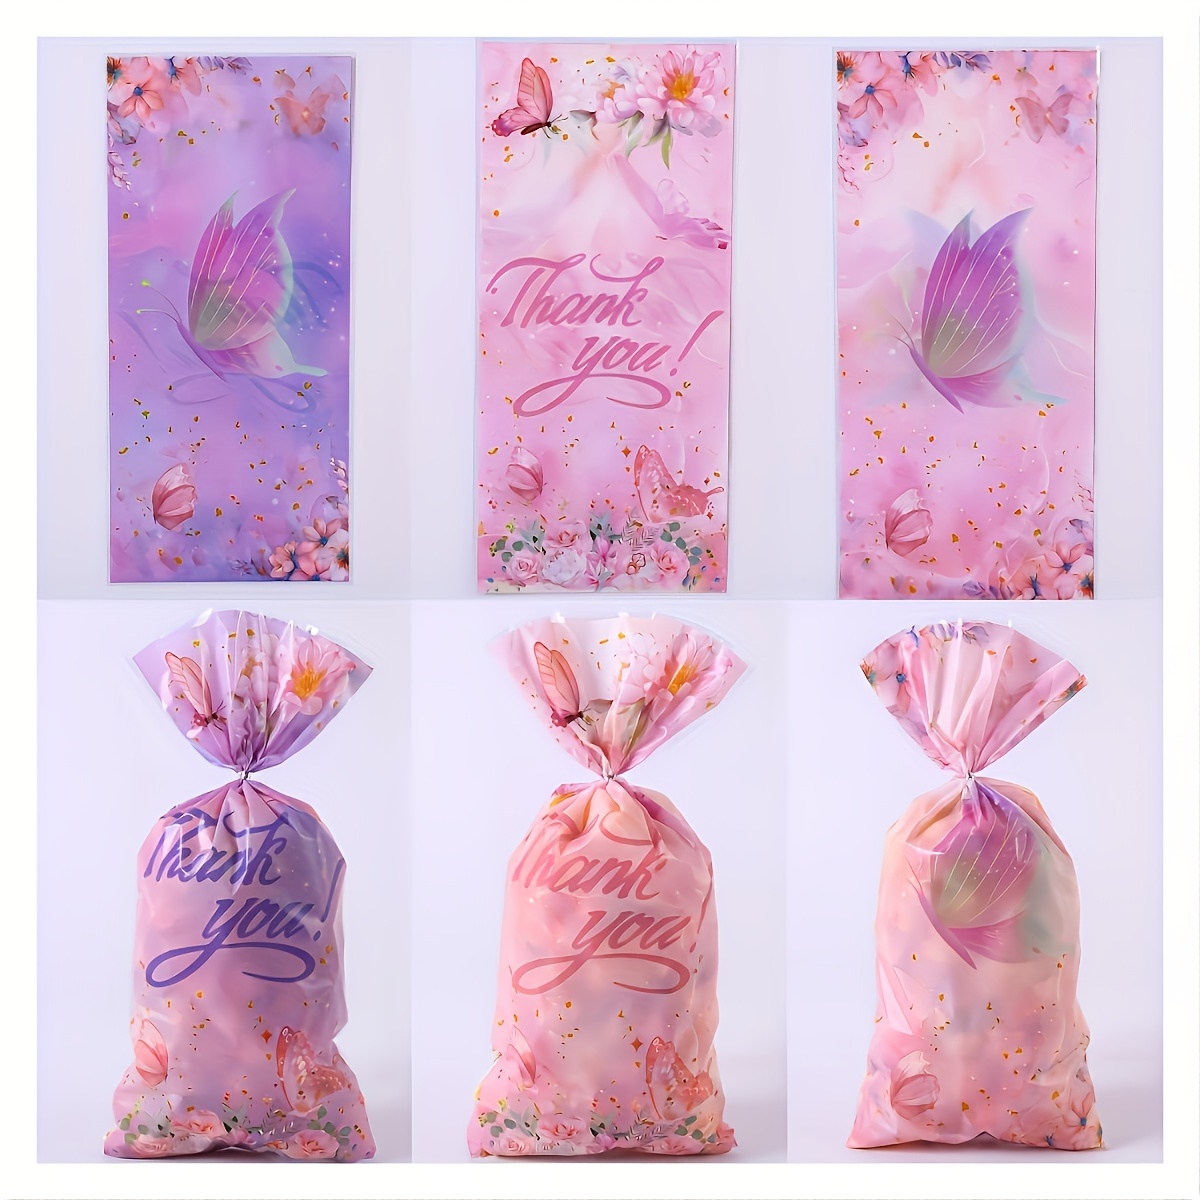 50pcs Transparent Plastic Lace & Butterfly Bowknot Printed Packaging Bags